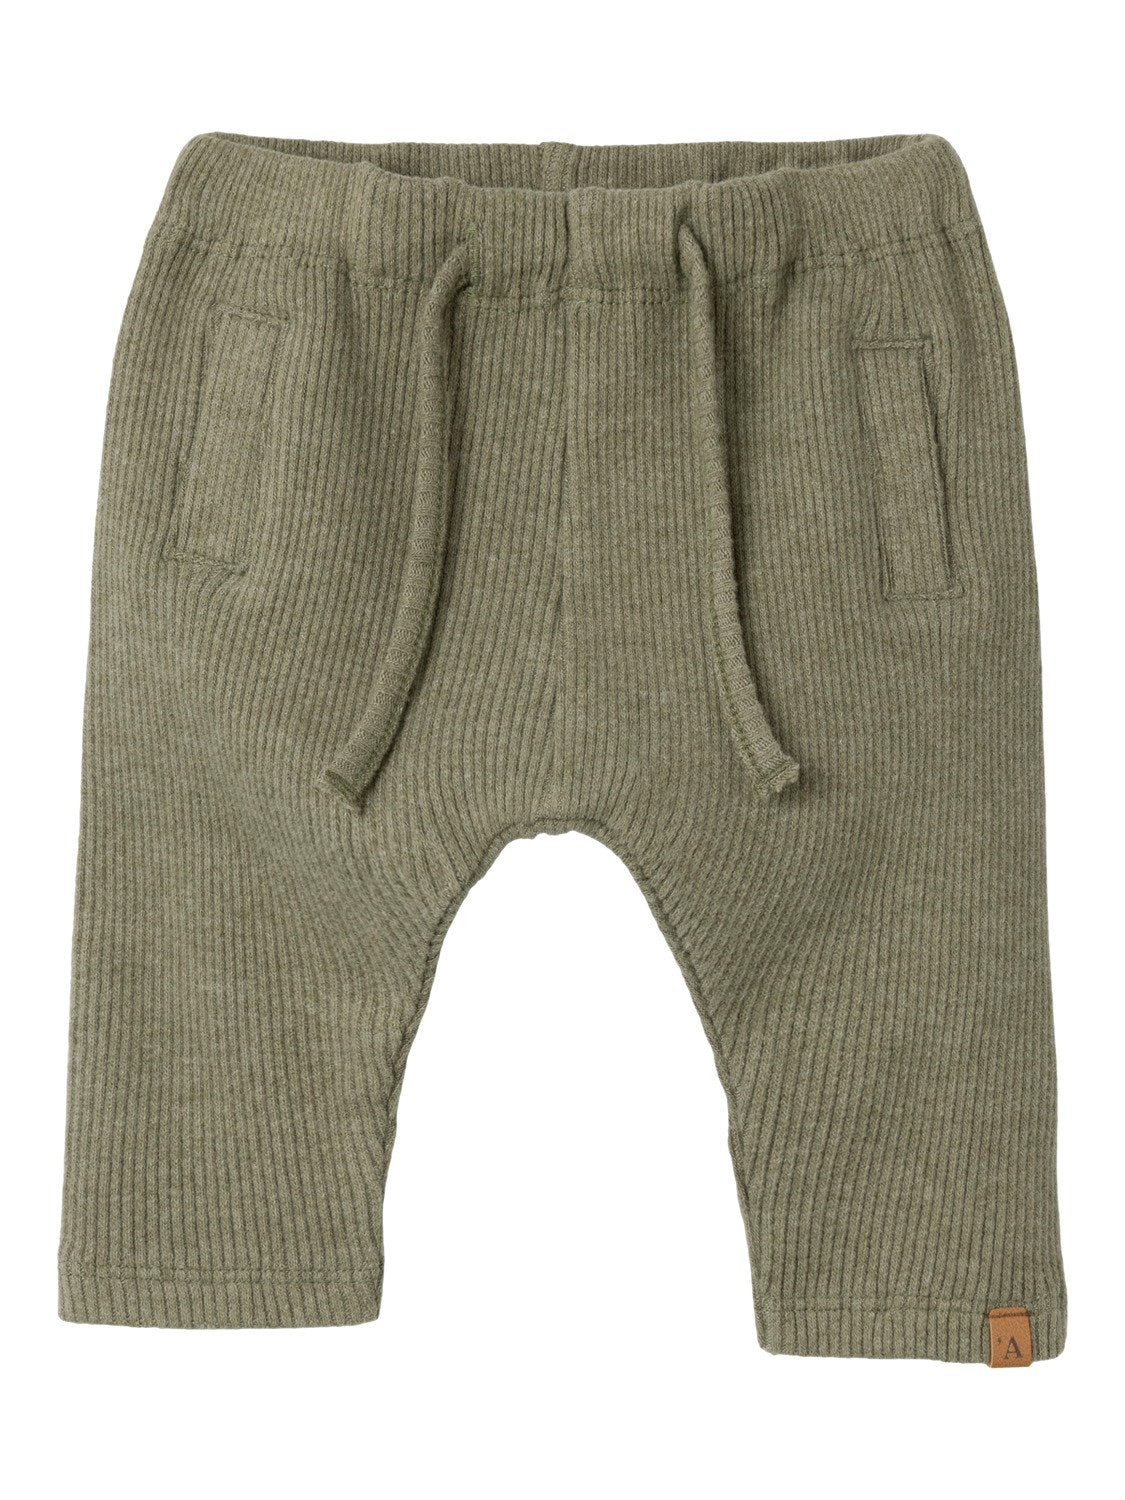 Lil Atelier Sophio Loose Pant - Loden Green